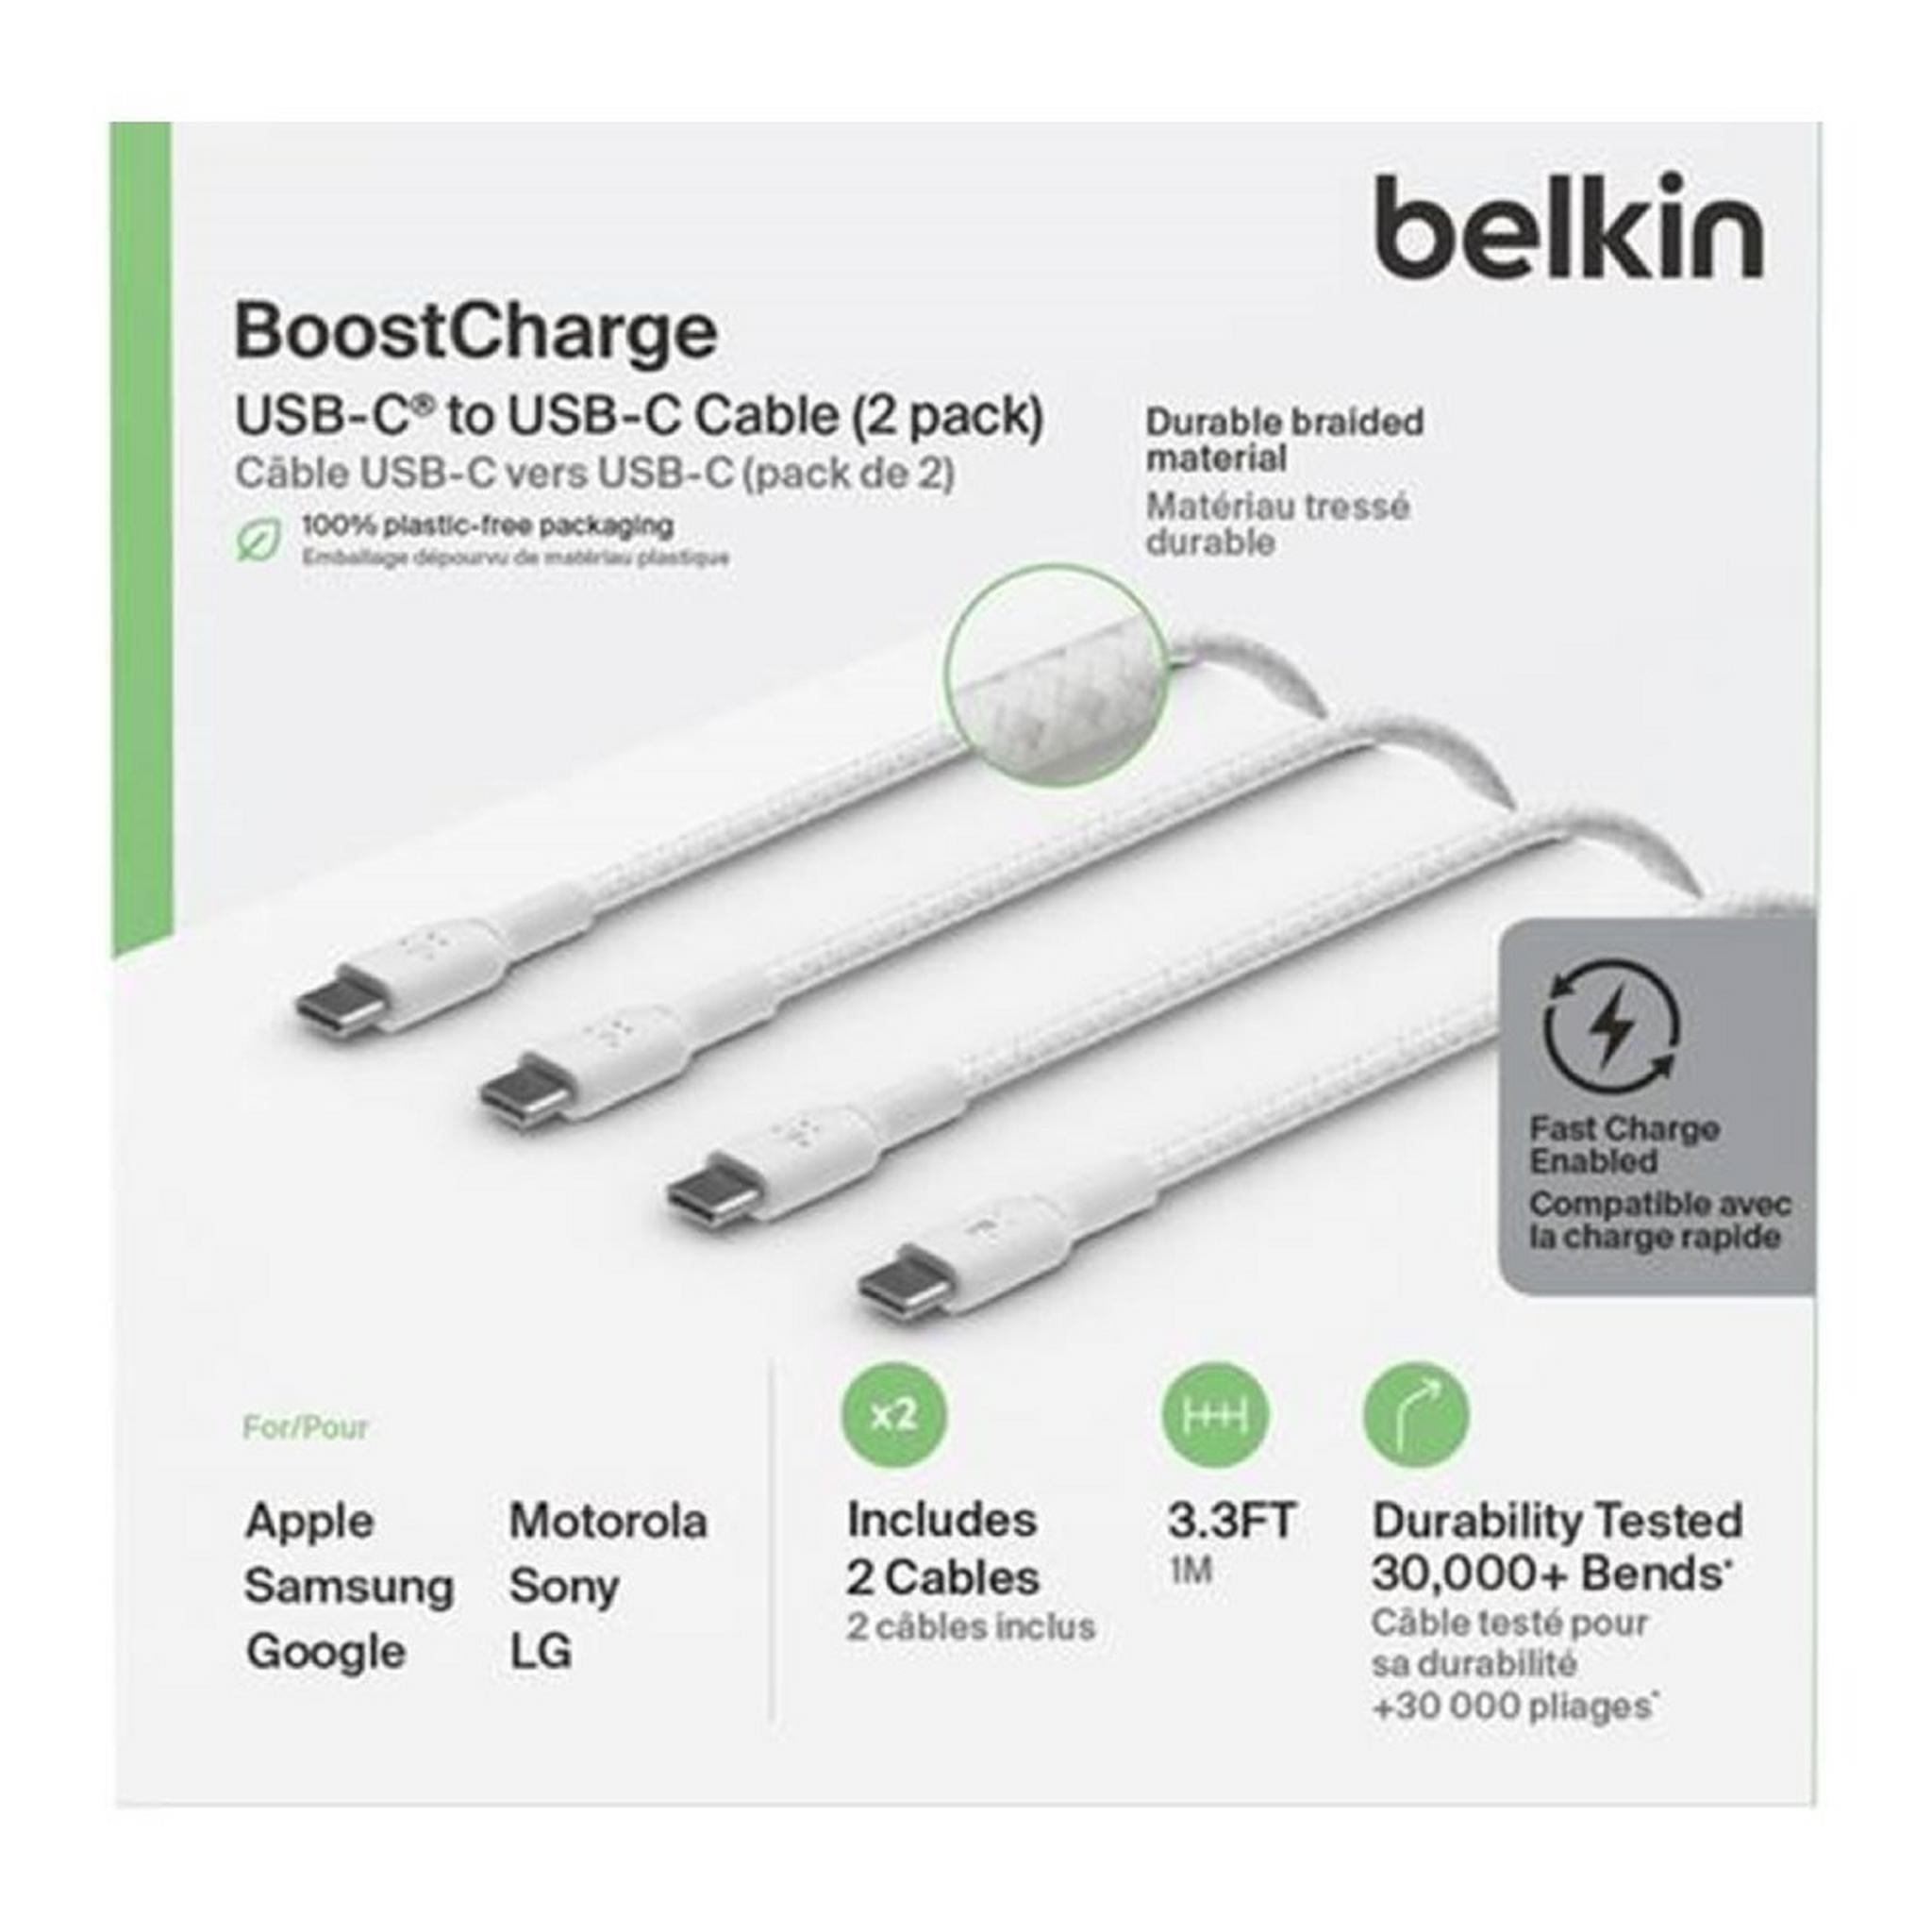 Belkin BoostCharge Braided USB-C to USB-C Cable, 2m, Twin Pack, CAB004 - White